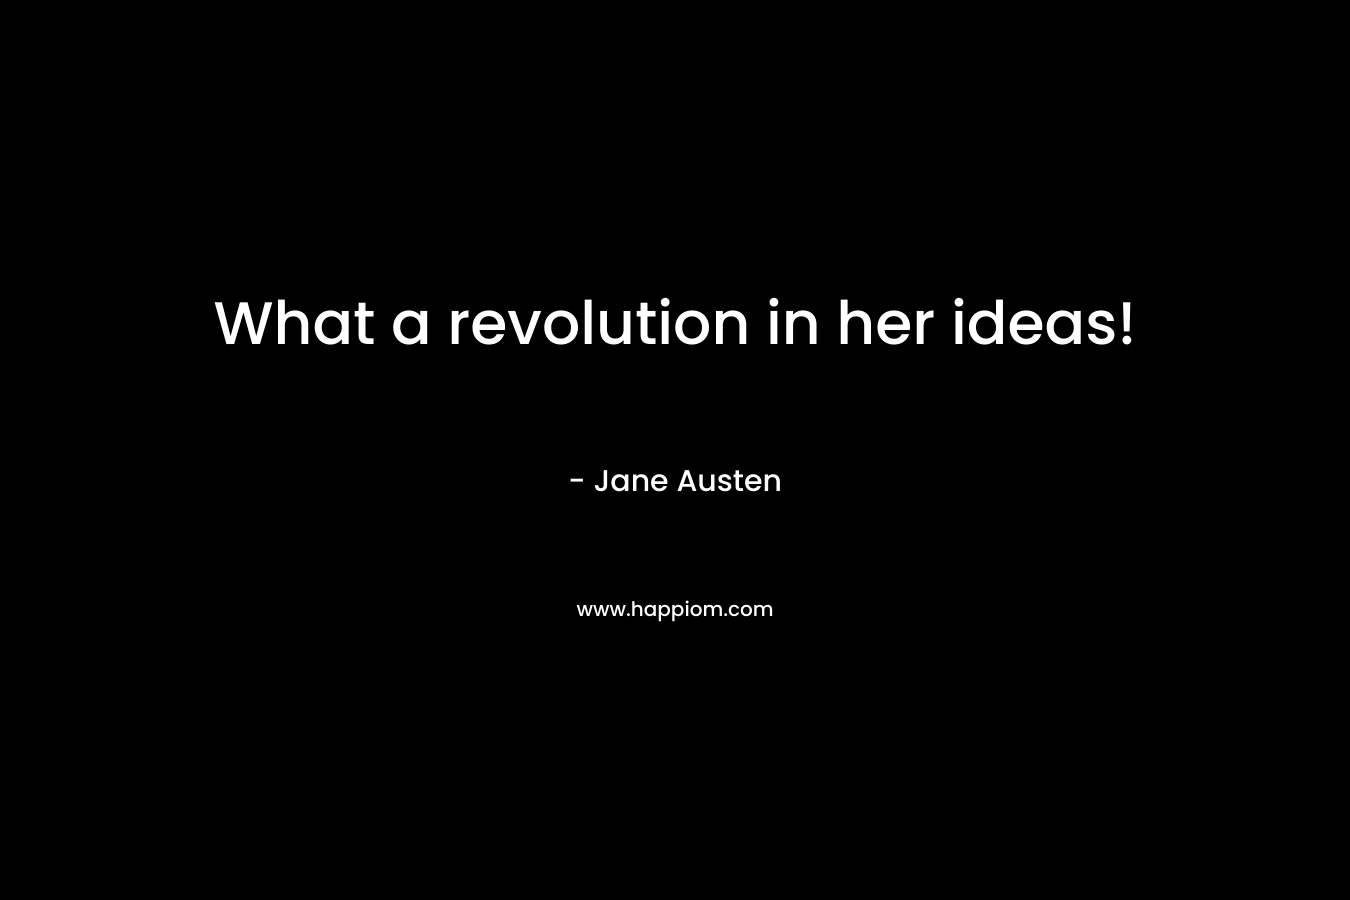 What a revolution in her ideas!